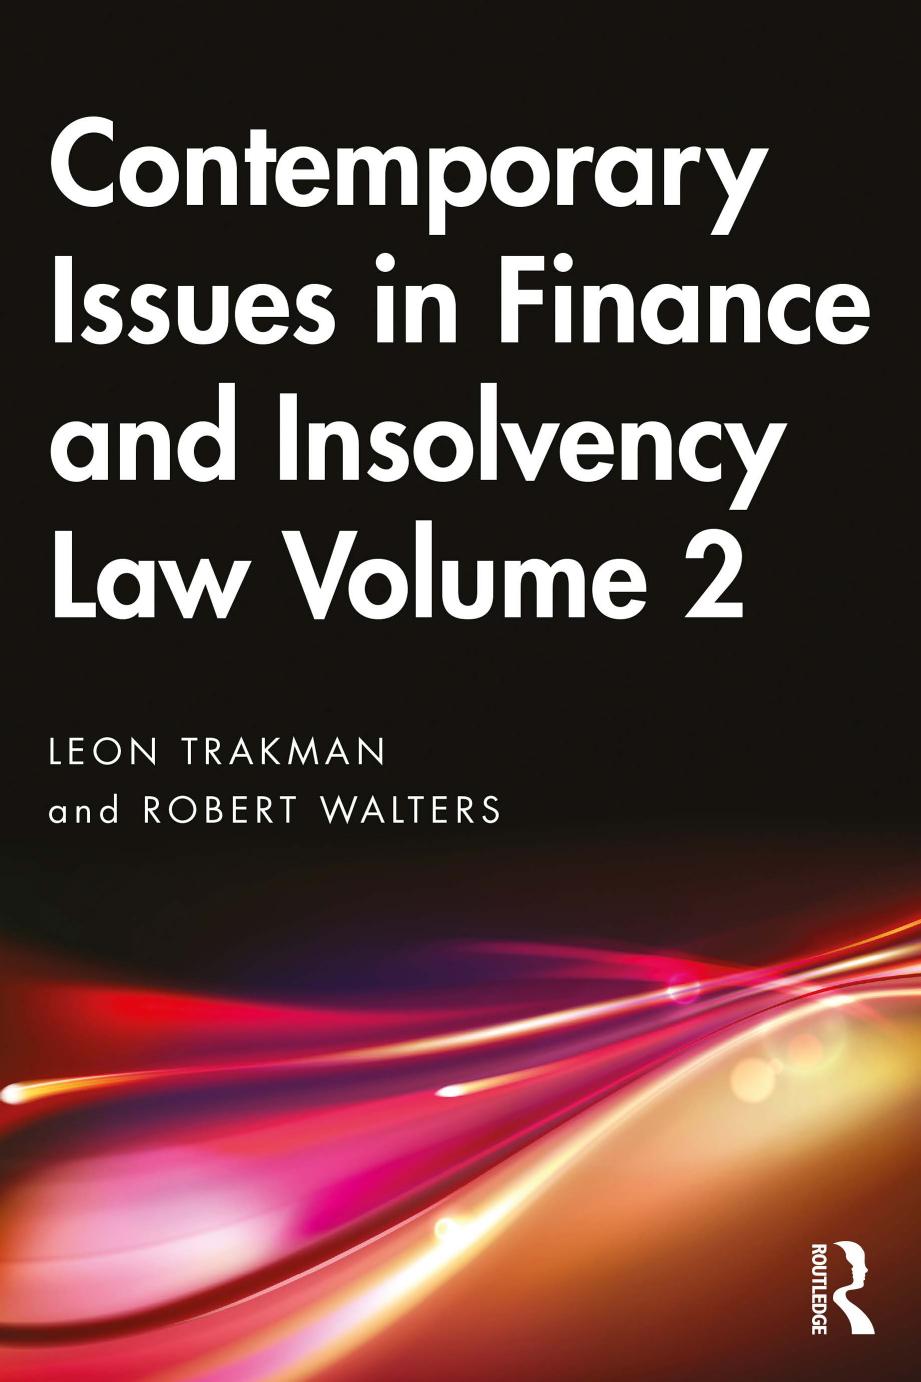 Contemporary Issues in Finance and Insolvency Law, Volume 2 by Leon Trakman Robert Walters